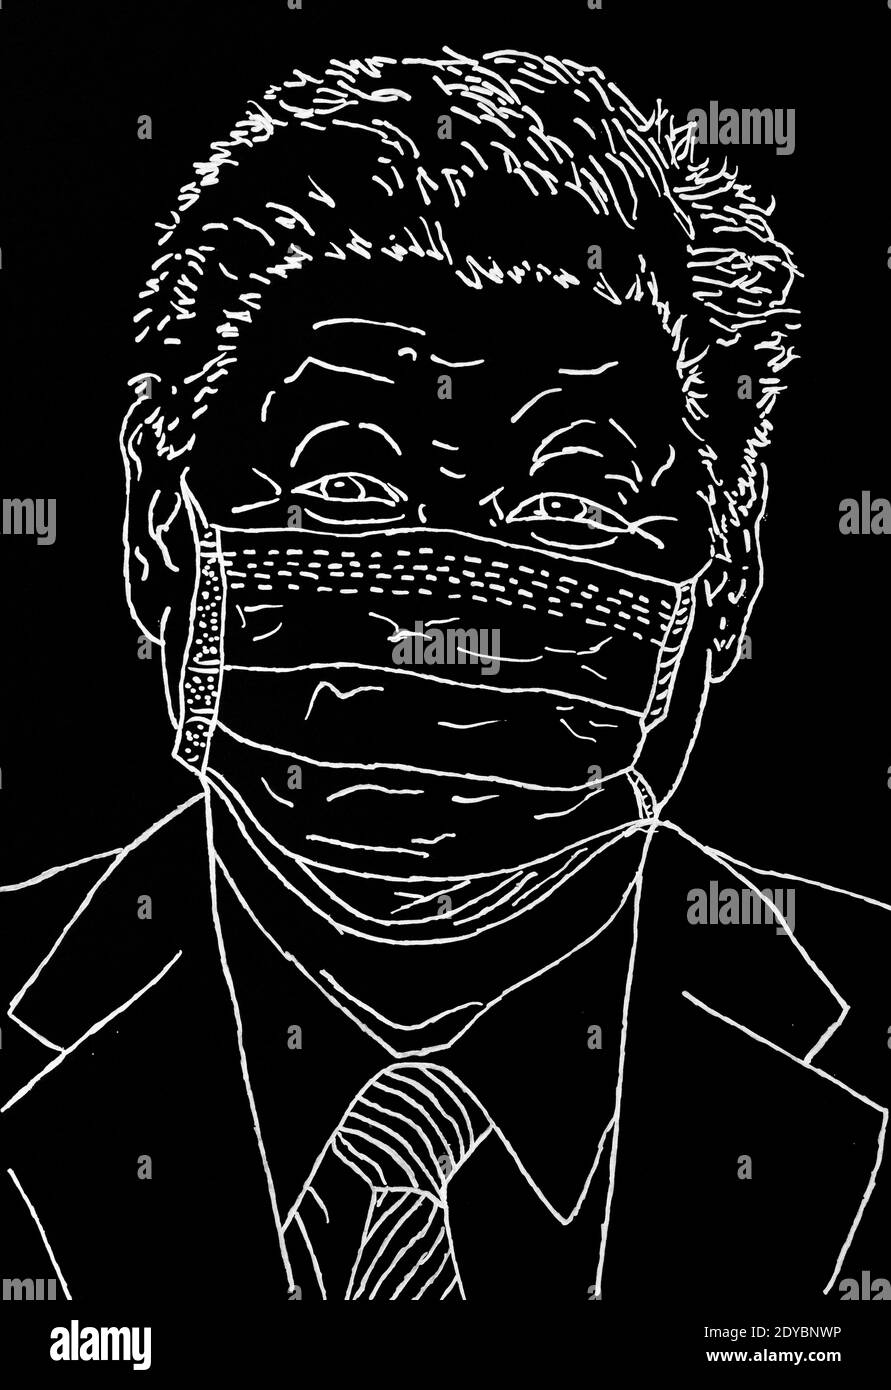 Drawing by Xi Jinping, President of the People's Republic of China, with a mask. Dessin de Xi Jinping, President de la Republique Populaire de Chine, Stock Photo